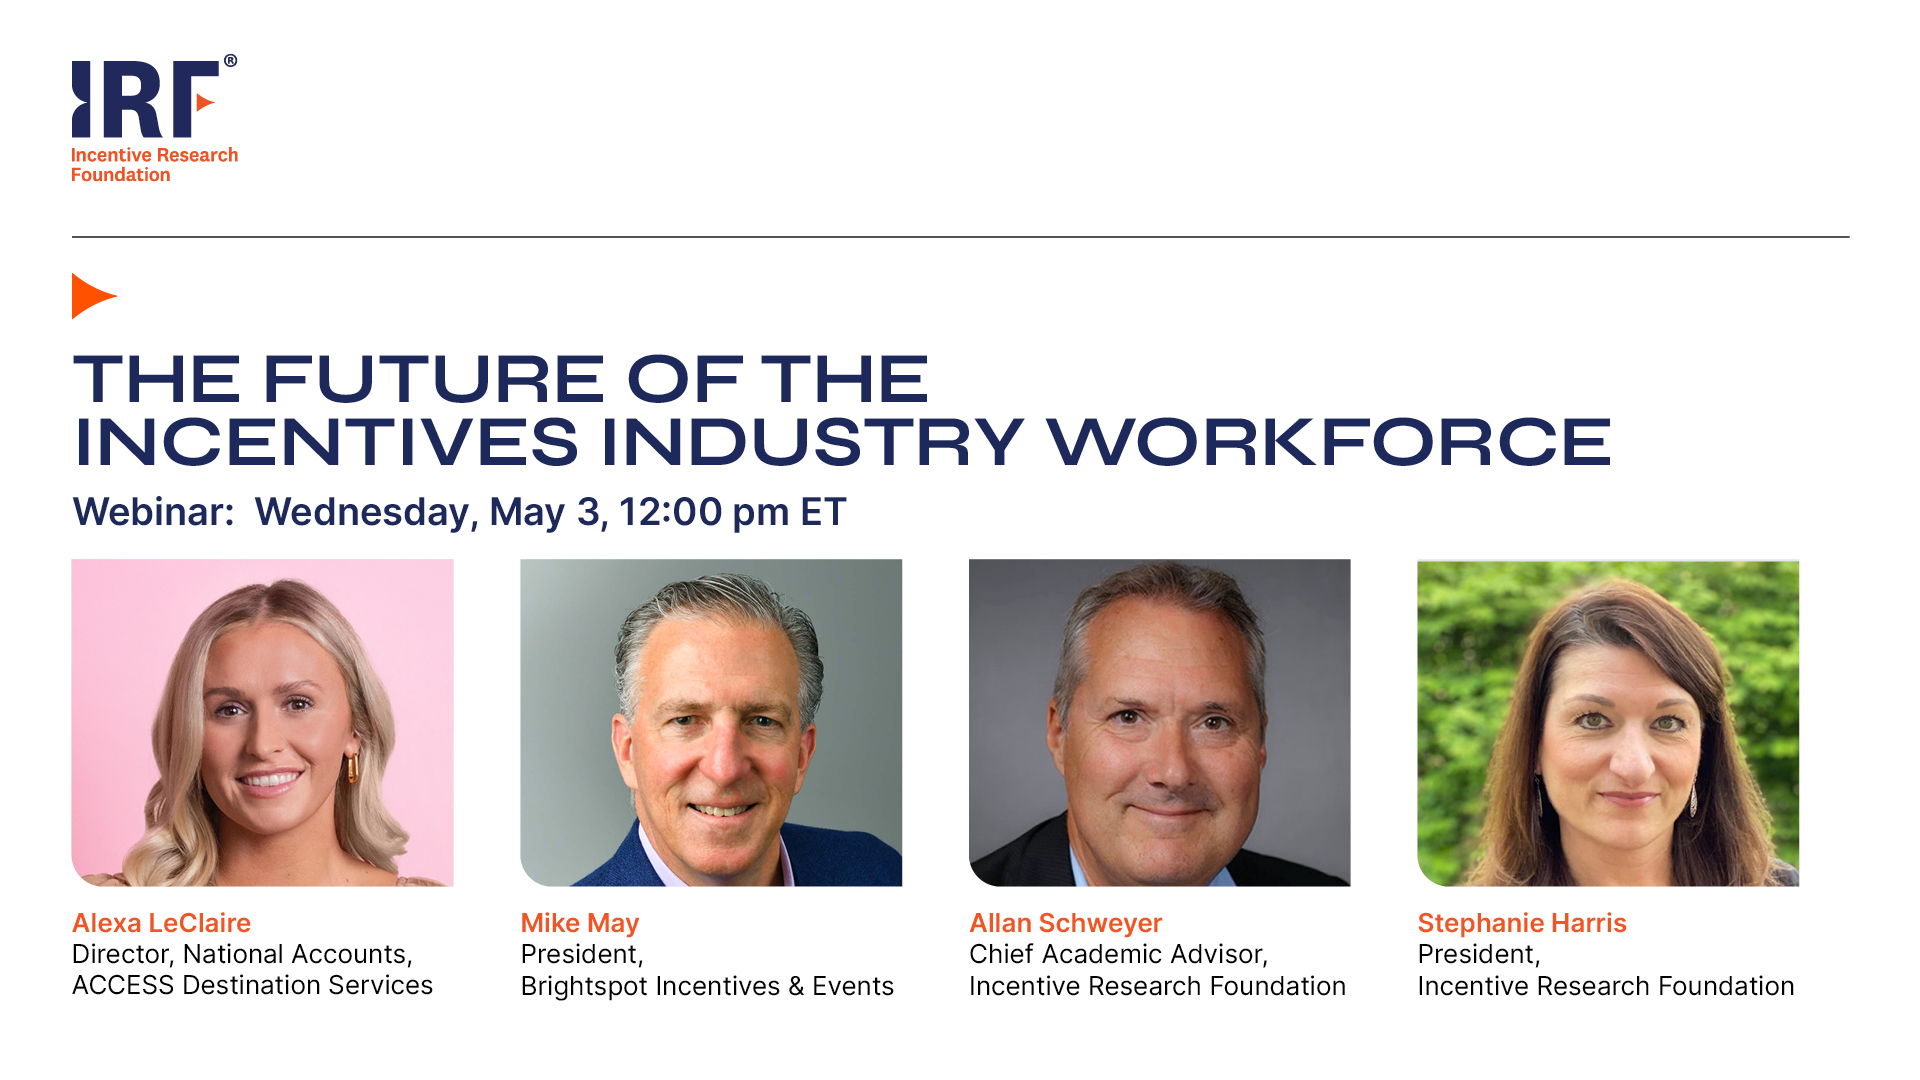 IRF Webinar: The Future of the Incentives Industry Workforce